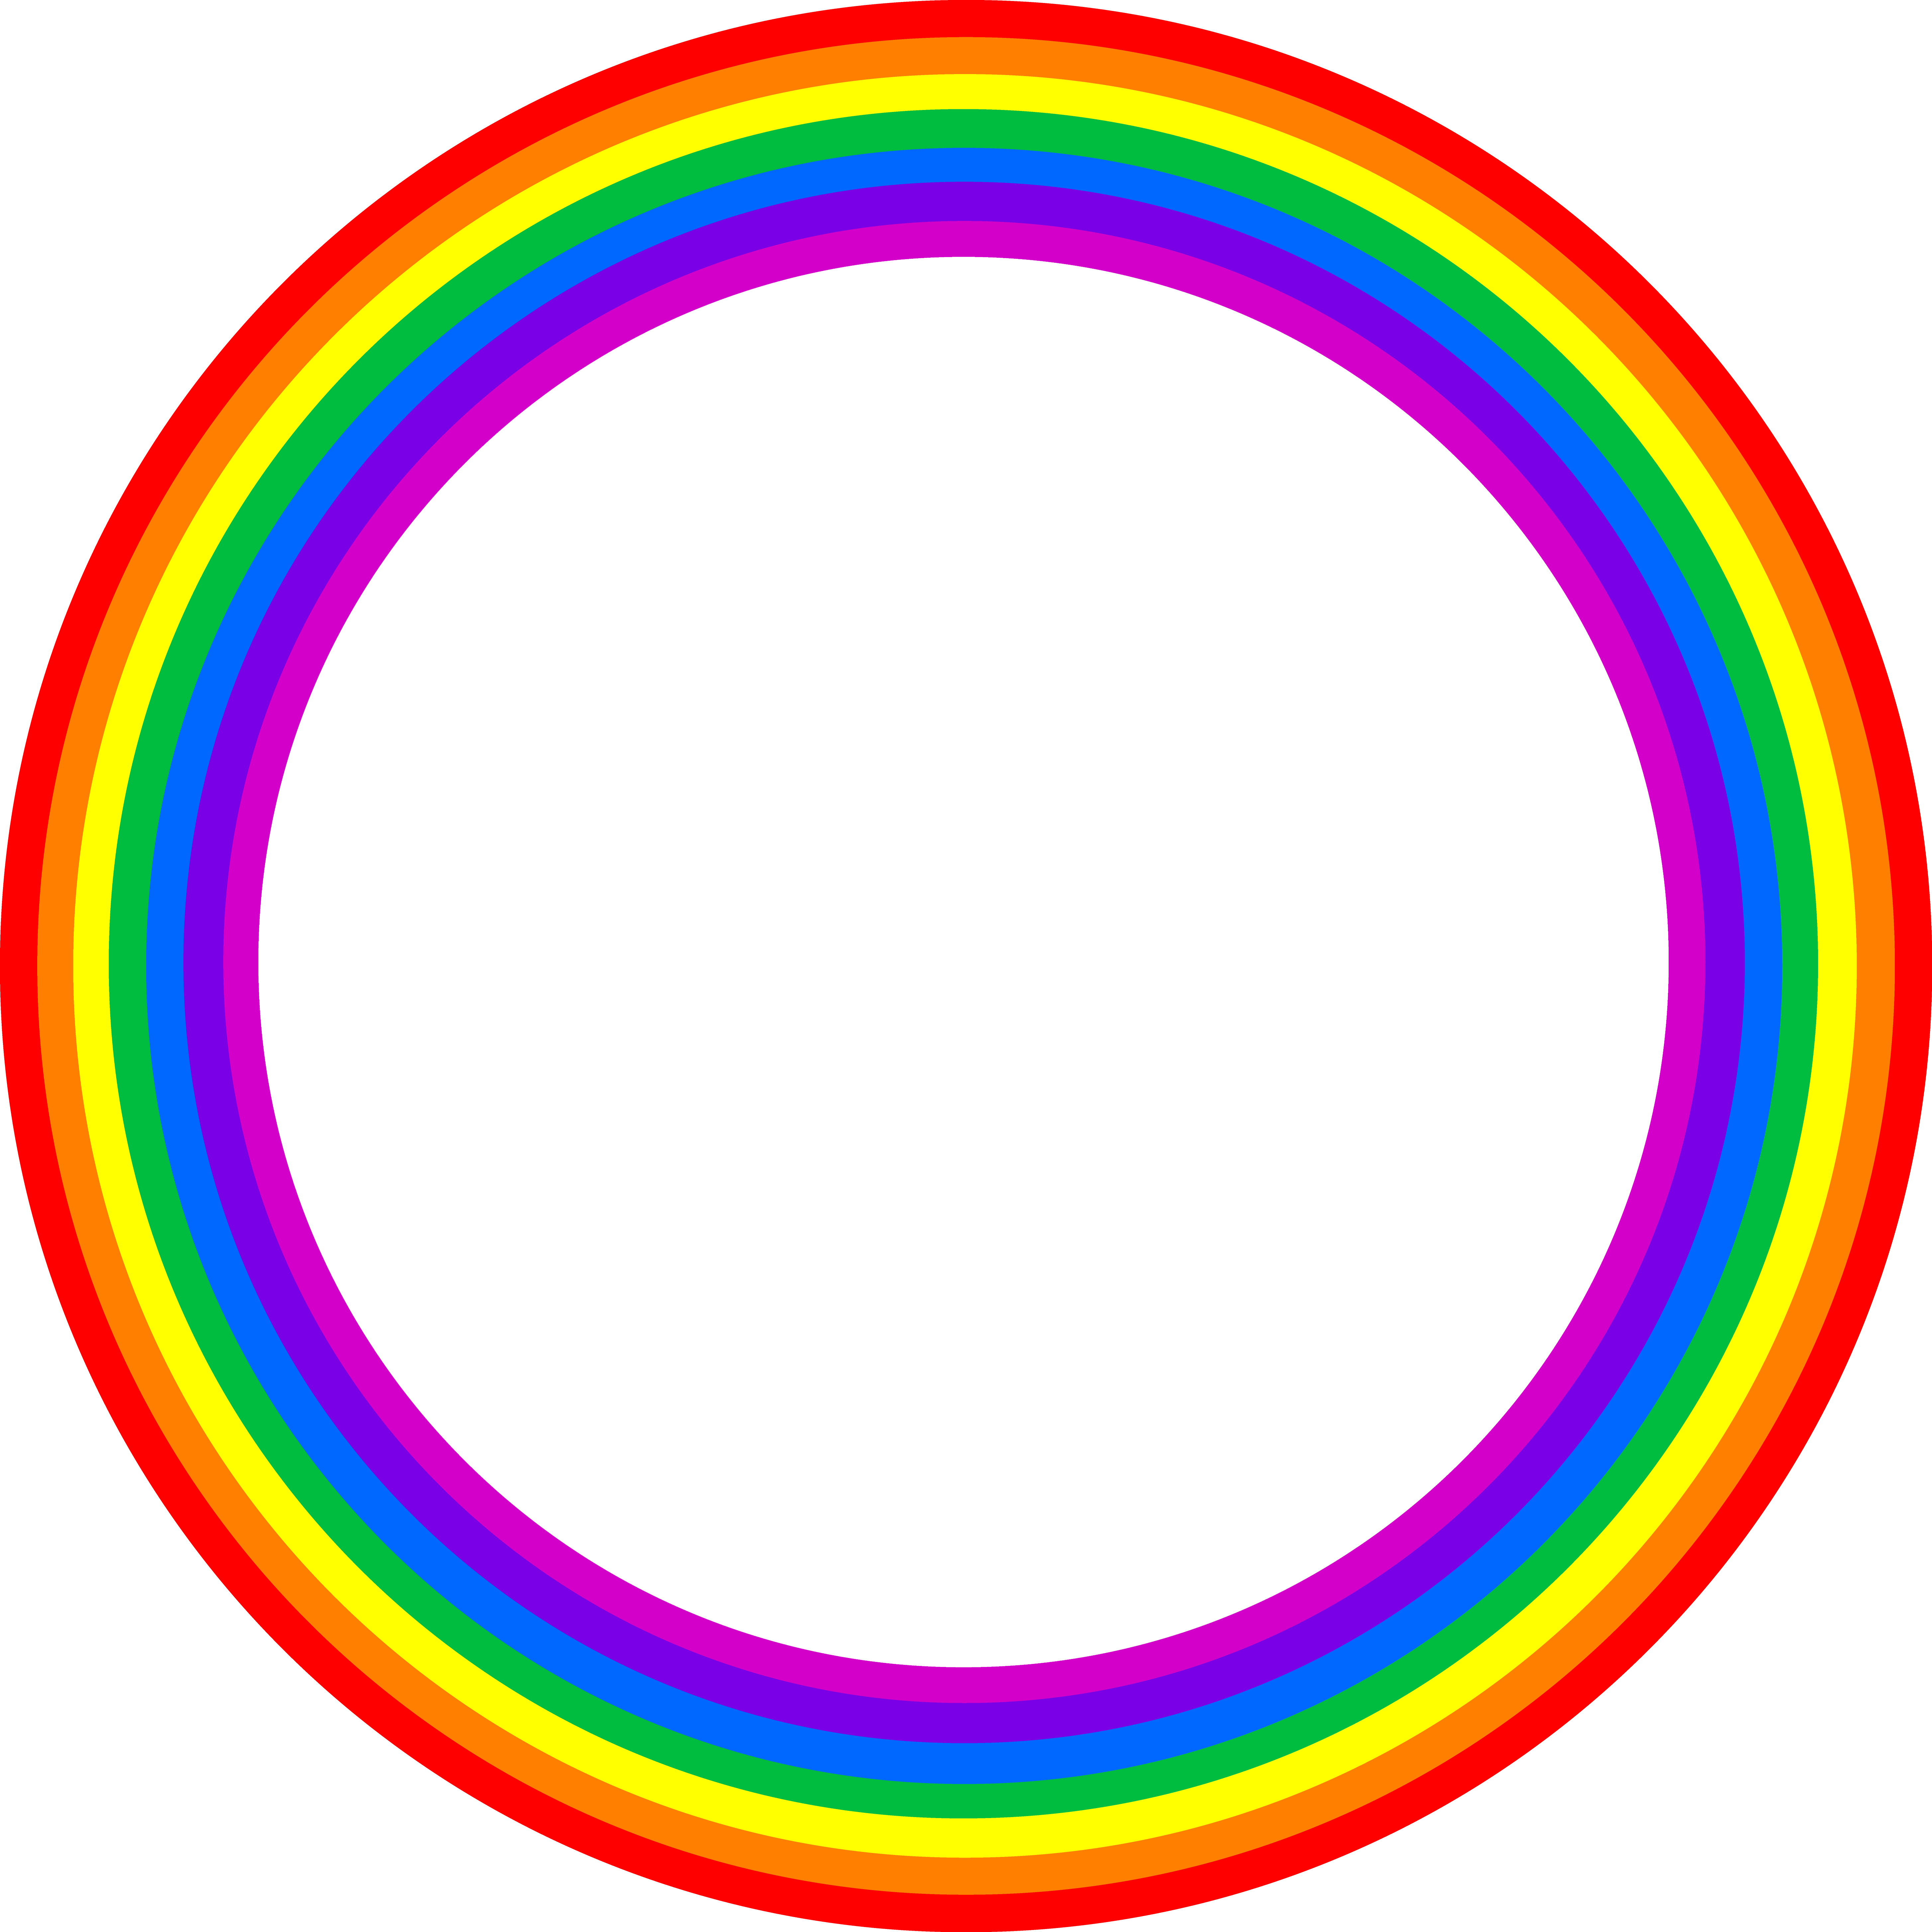 Colorful Concentric Rainbow Circles